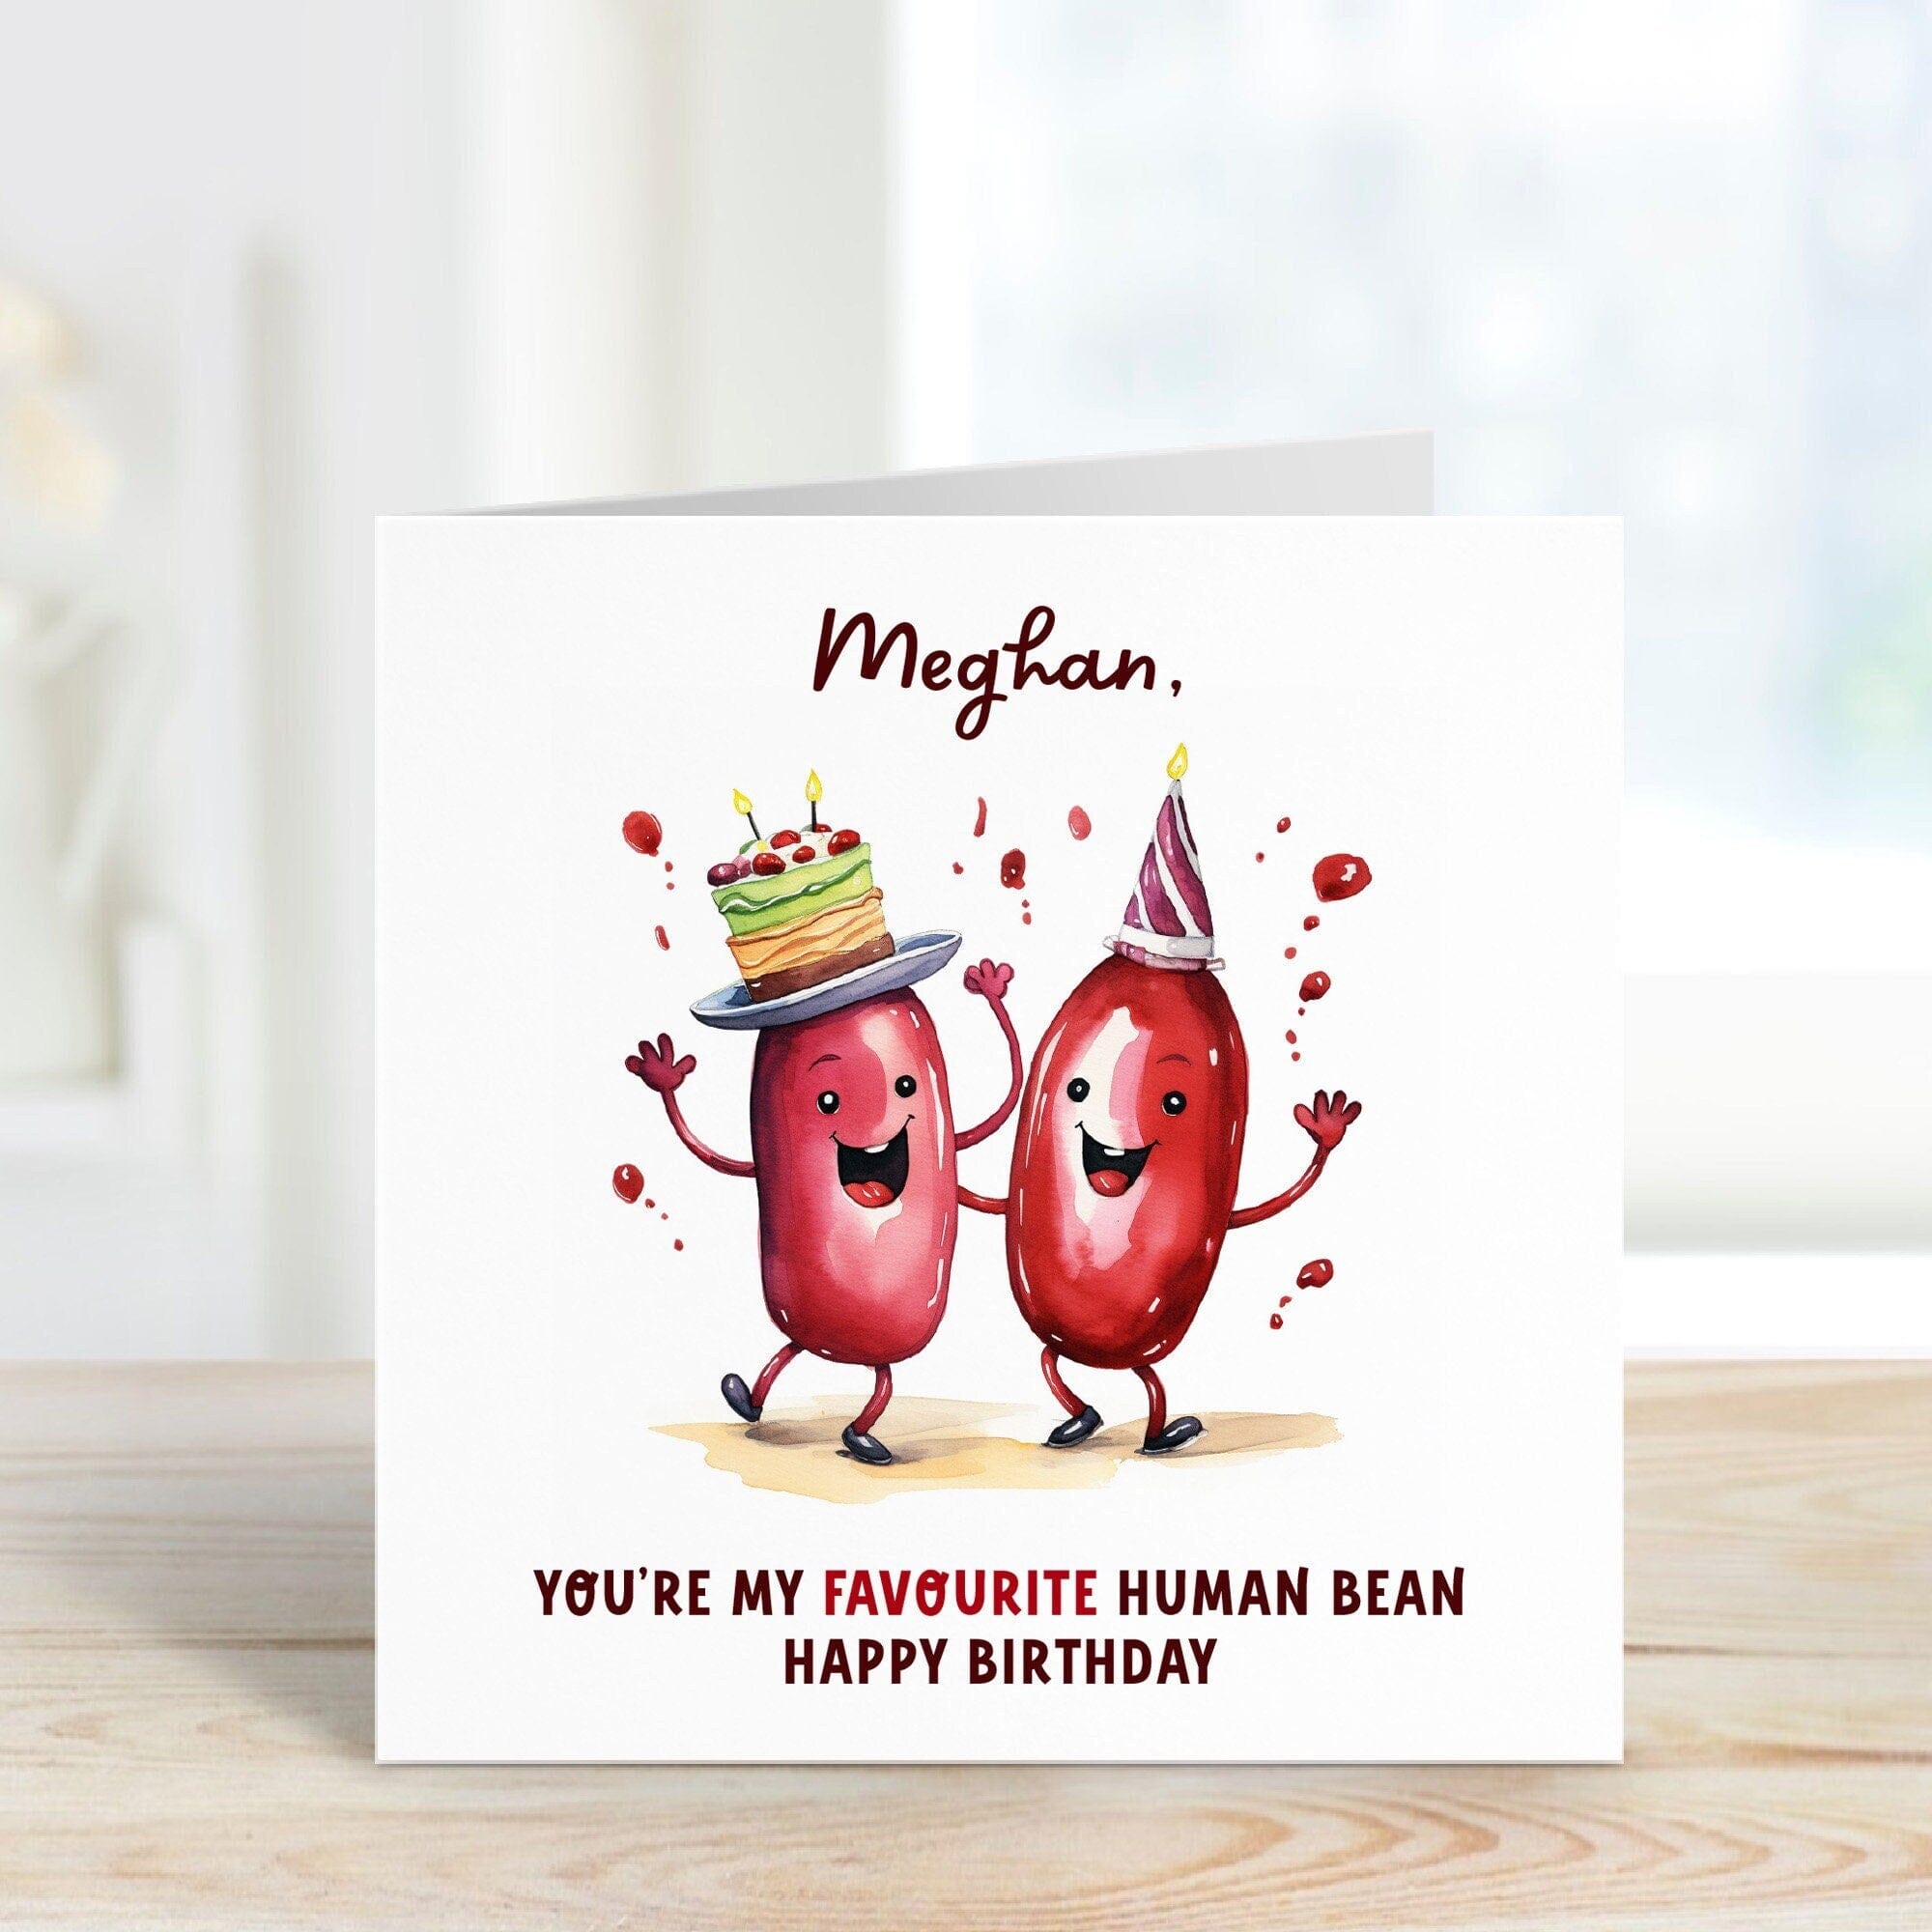 Personalised You're My Favourite Human Bean Birthday Card with Envelope, Greetings Card for Her Him